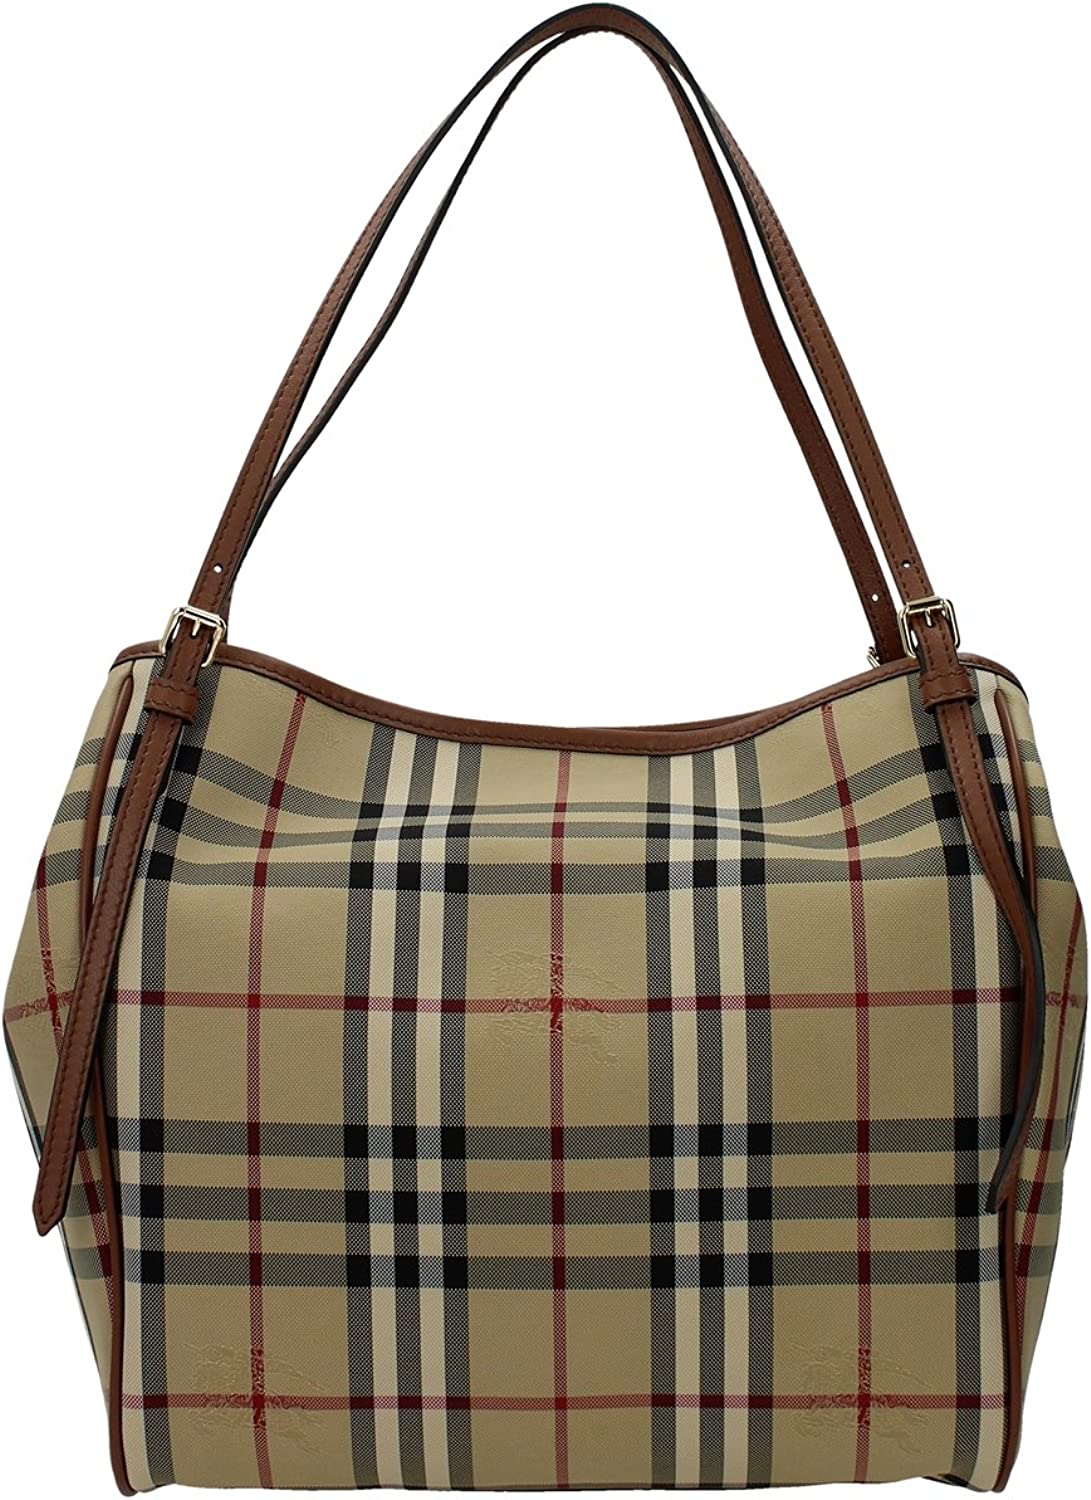 Horseferry Check Tote Bag